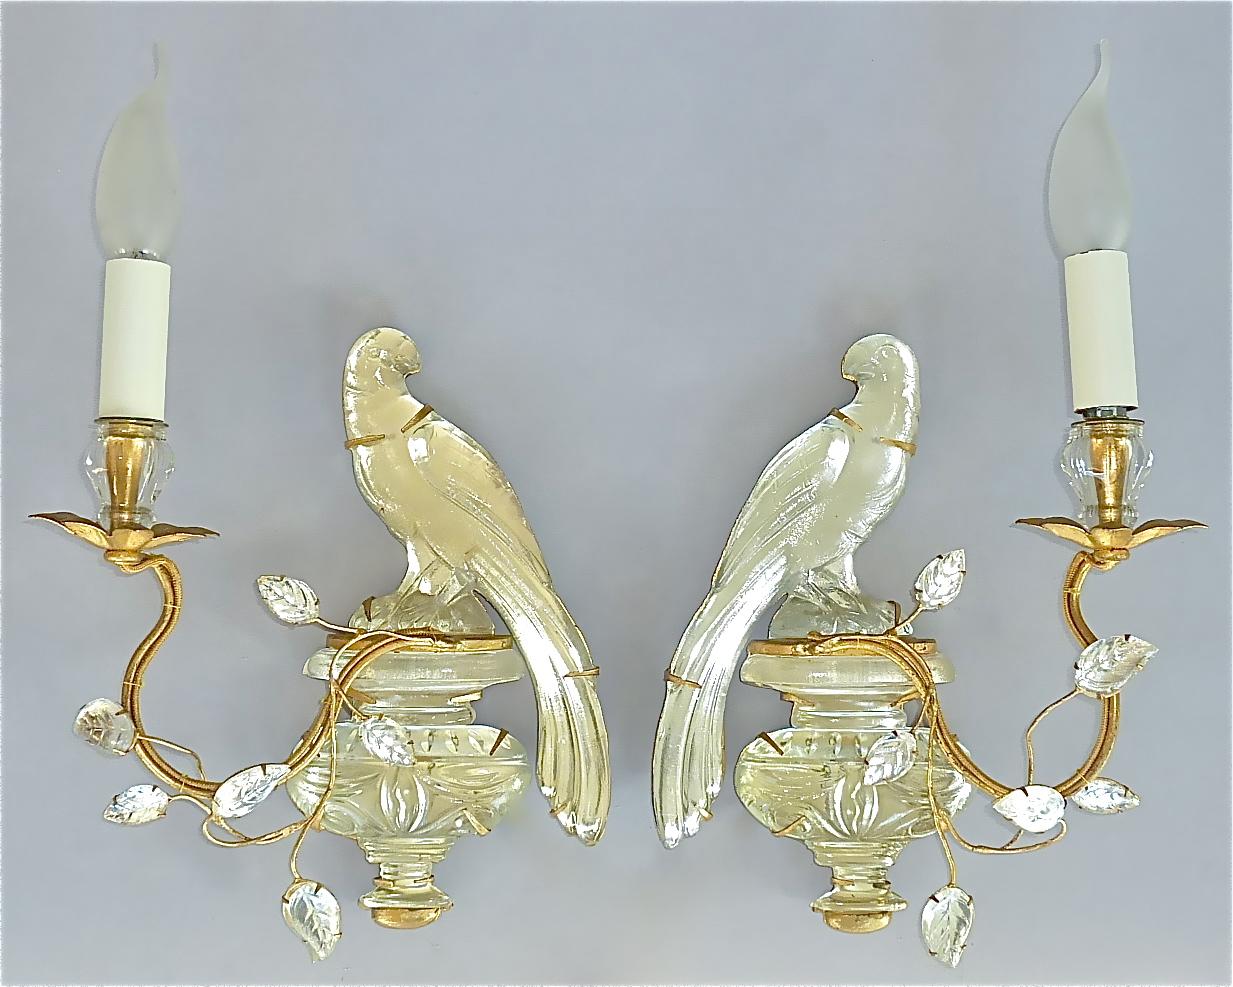 Fine and elegant pair of French handcrafted gilt brass metal and faceted crystal glass parakeet sconces by Maison Bagues, France circa 1950s to 1960s. Each Midcentury wall light displays a beautiful crystal urn with a charming and wonderfully